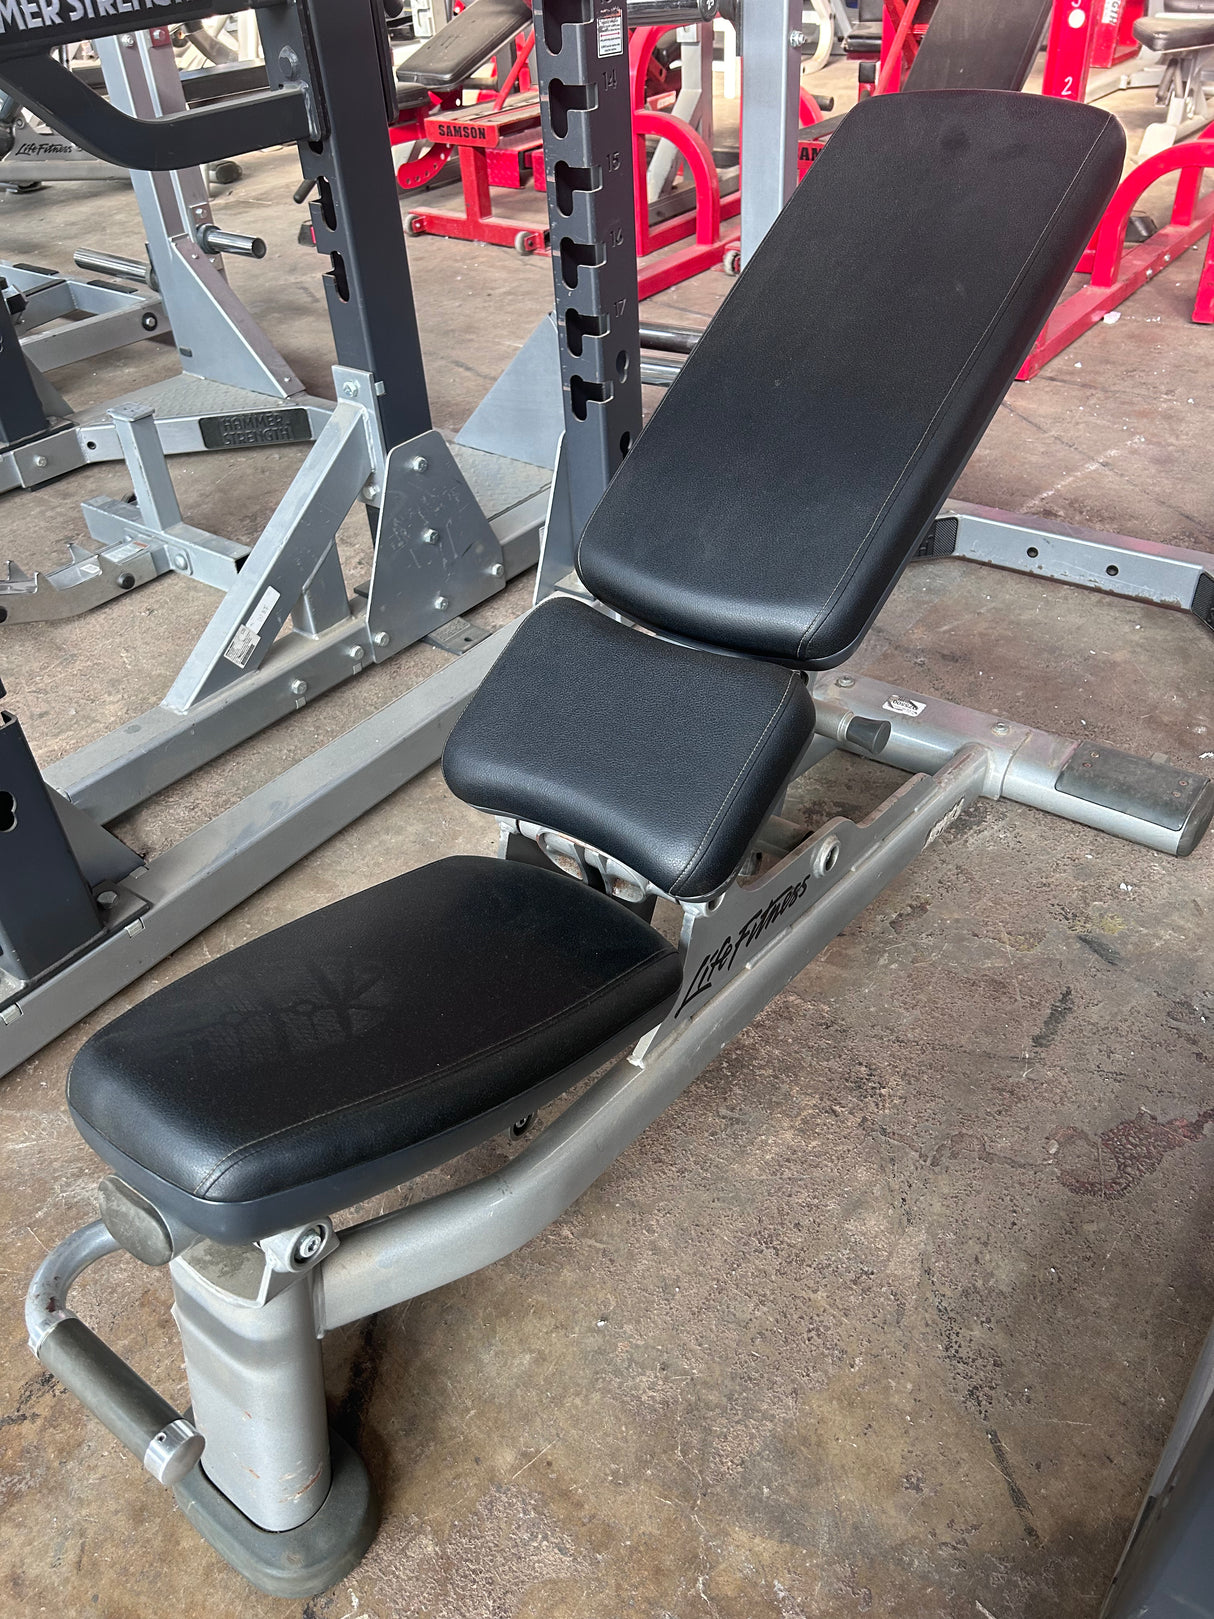 Pre-Owned Life Fitness Signature Series Multi-Adjustable Bench - ExerciseUnlimited